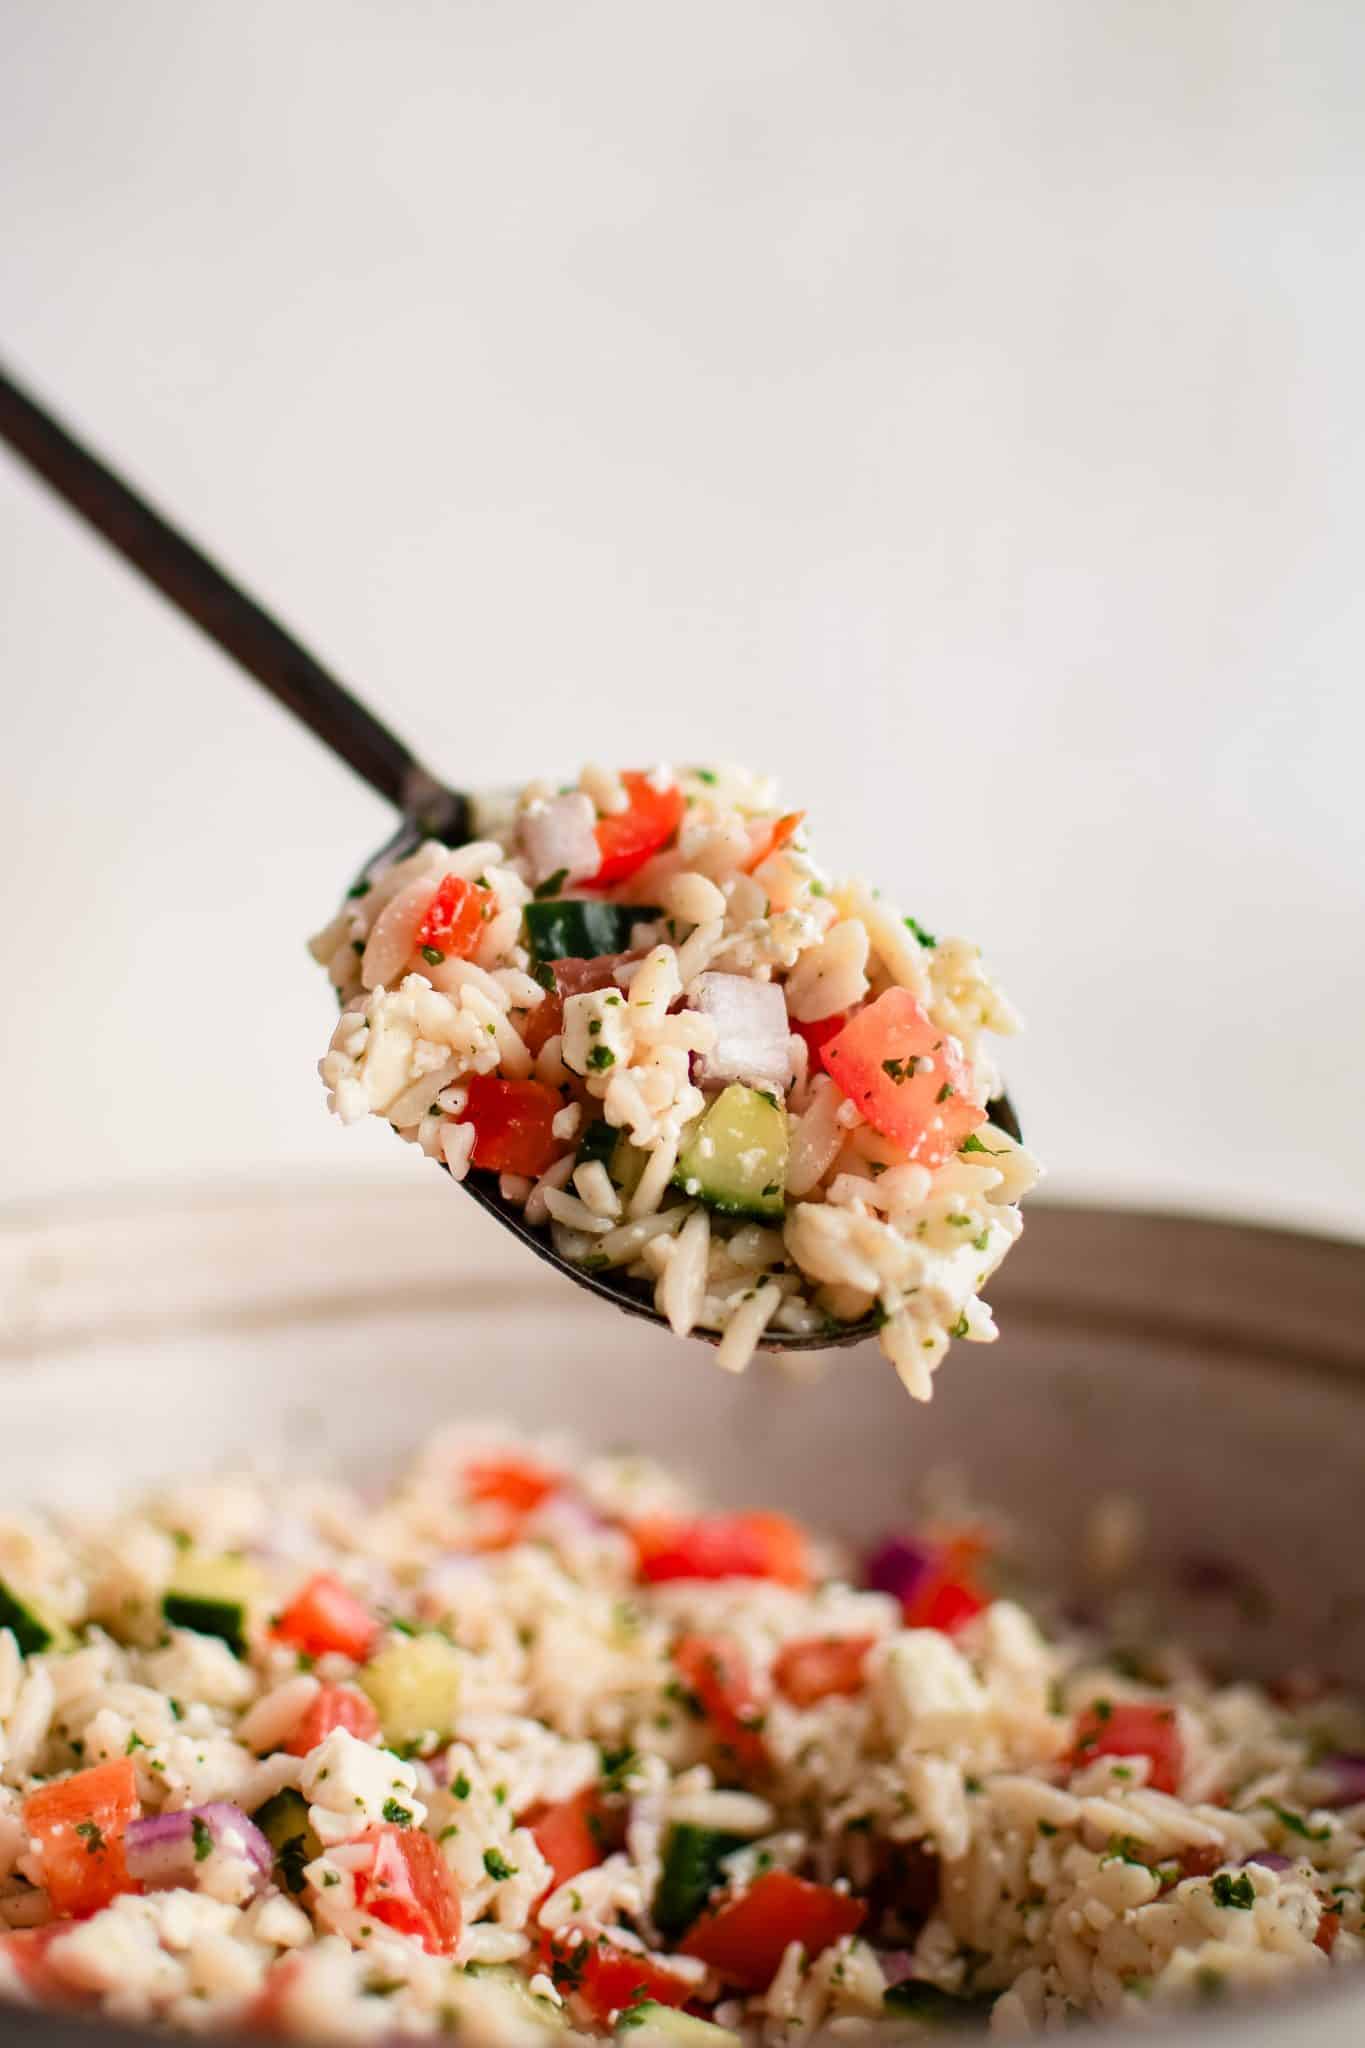 Large serving spoon filled with Mediterranean orzo salad hovering over a large bowl filled with the salad.